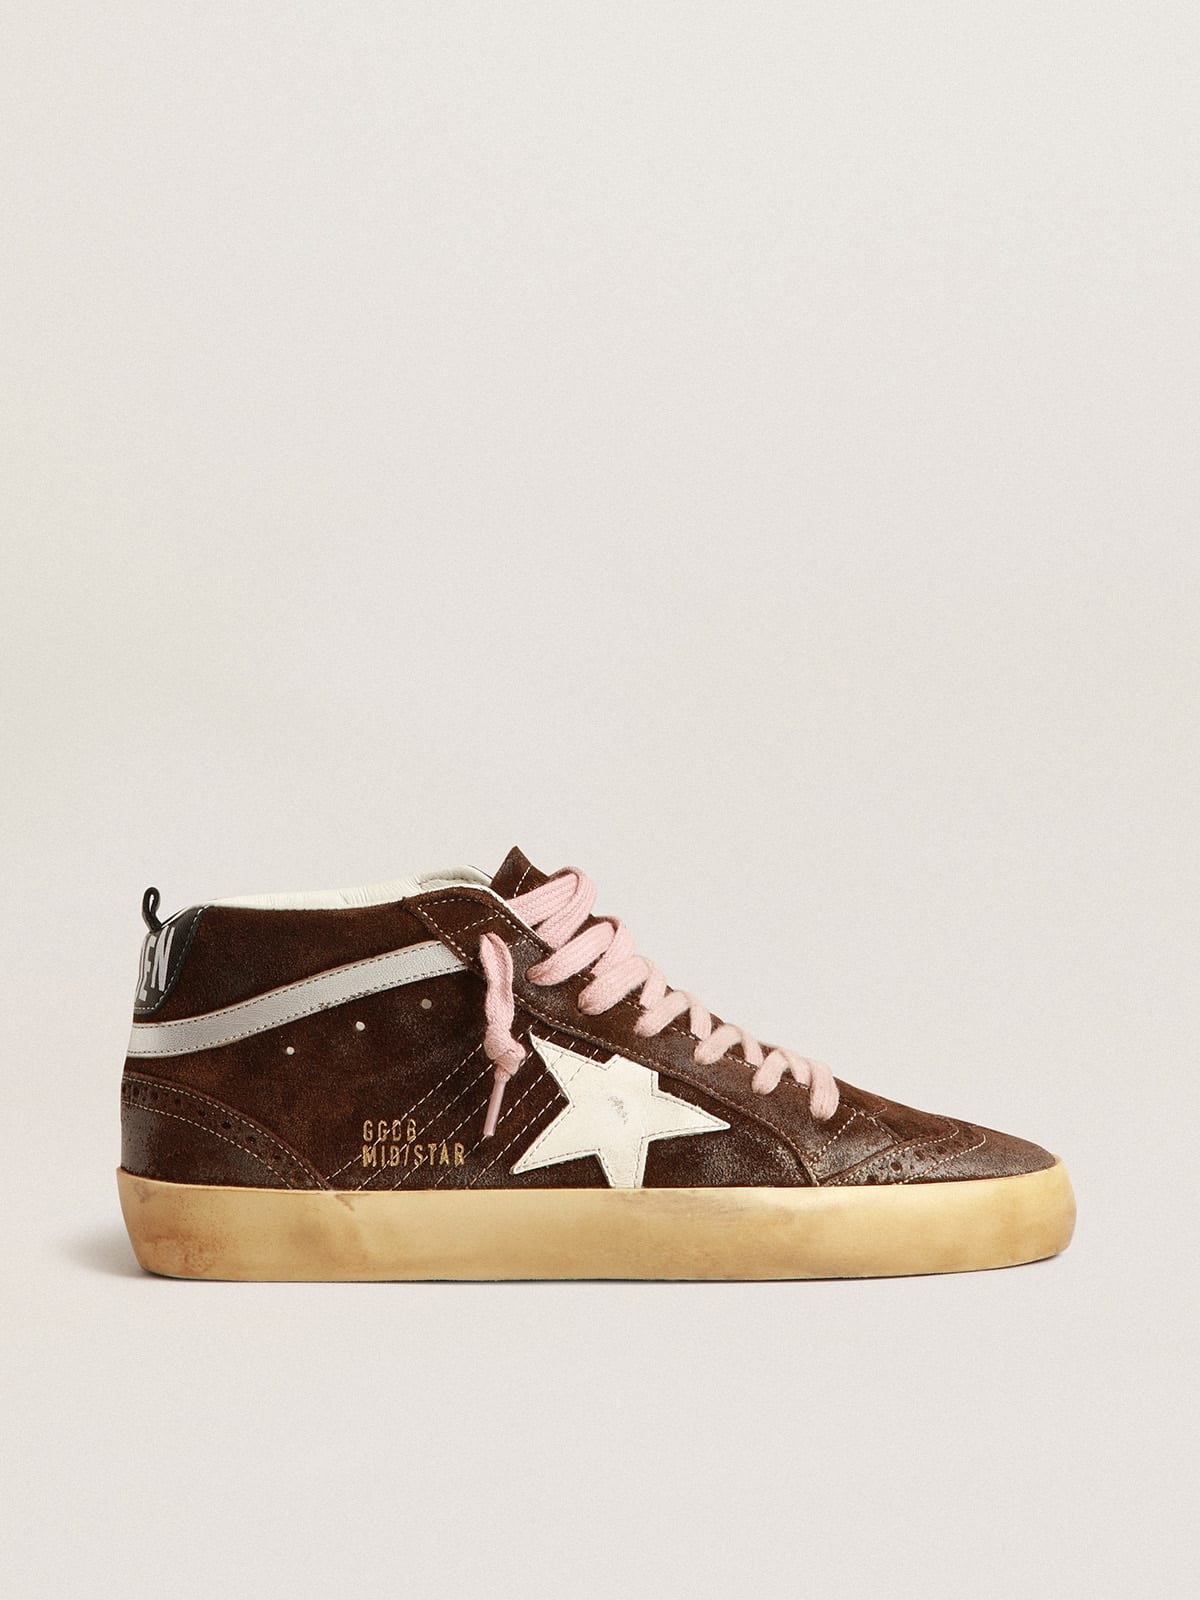 Mid Star in brown suede with white leather star - 1